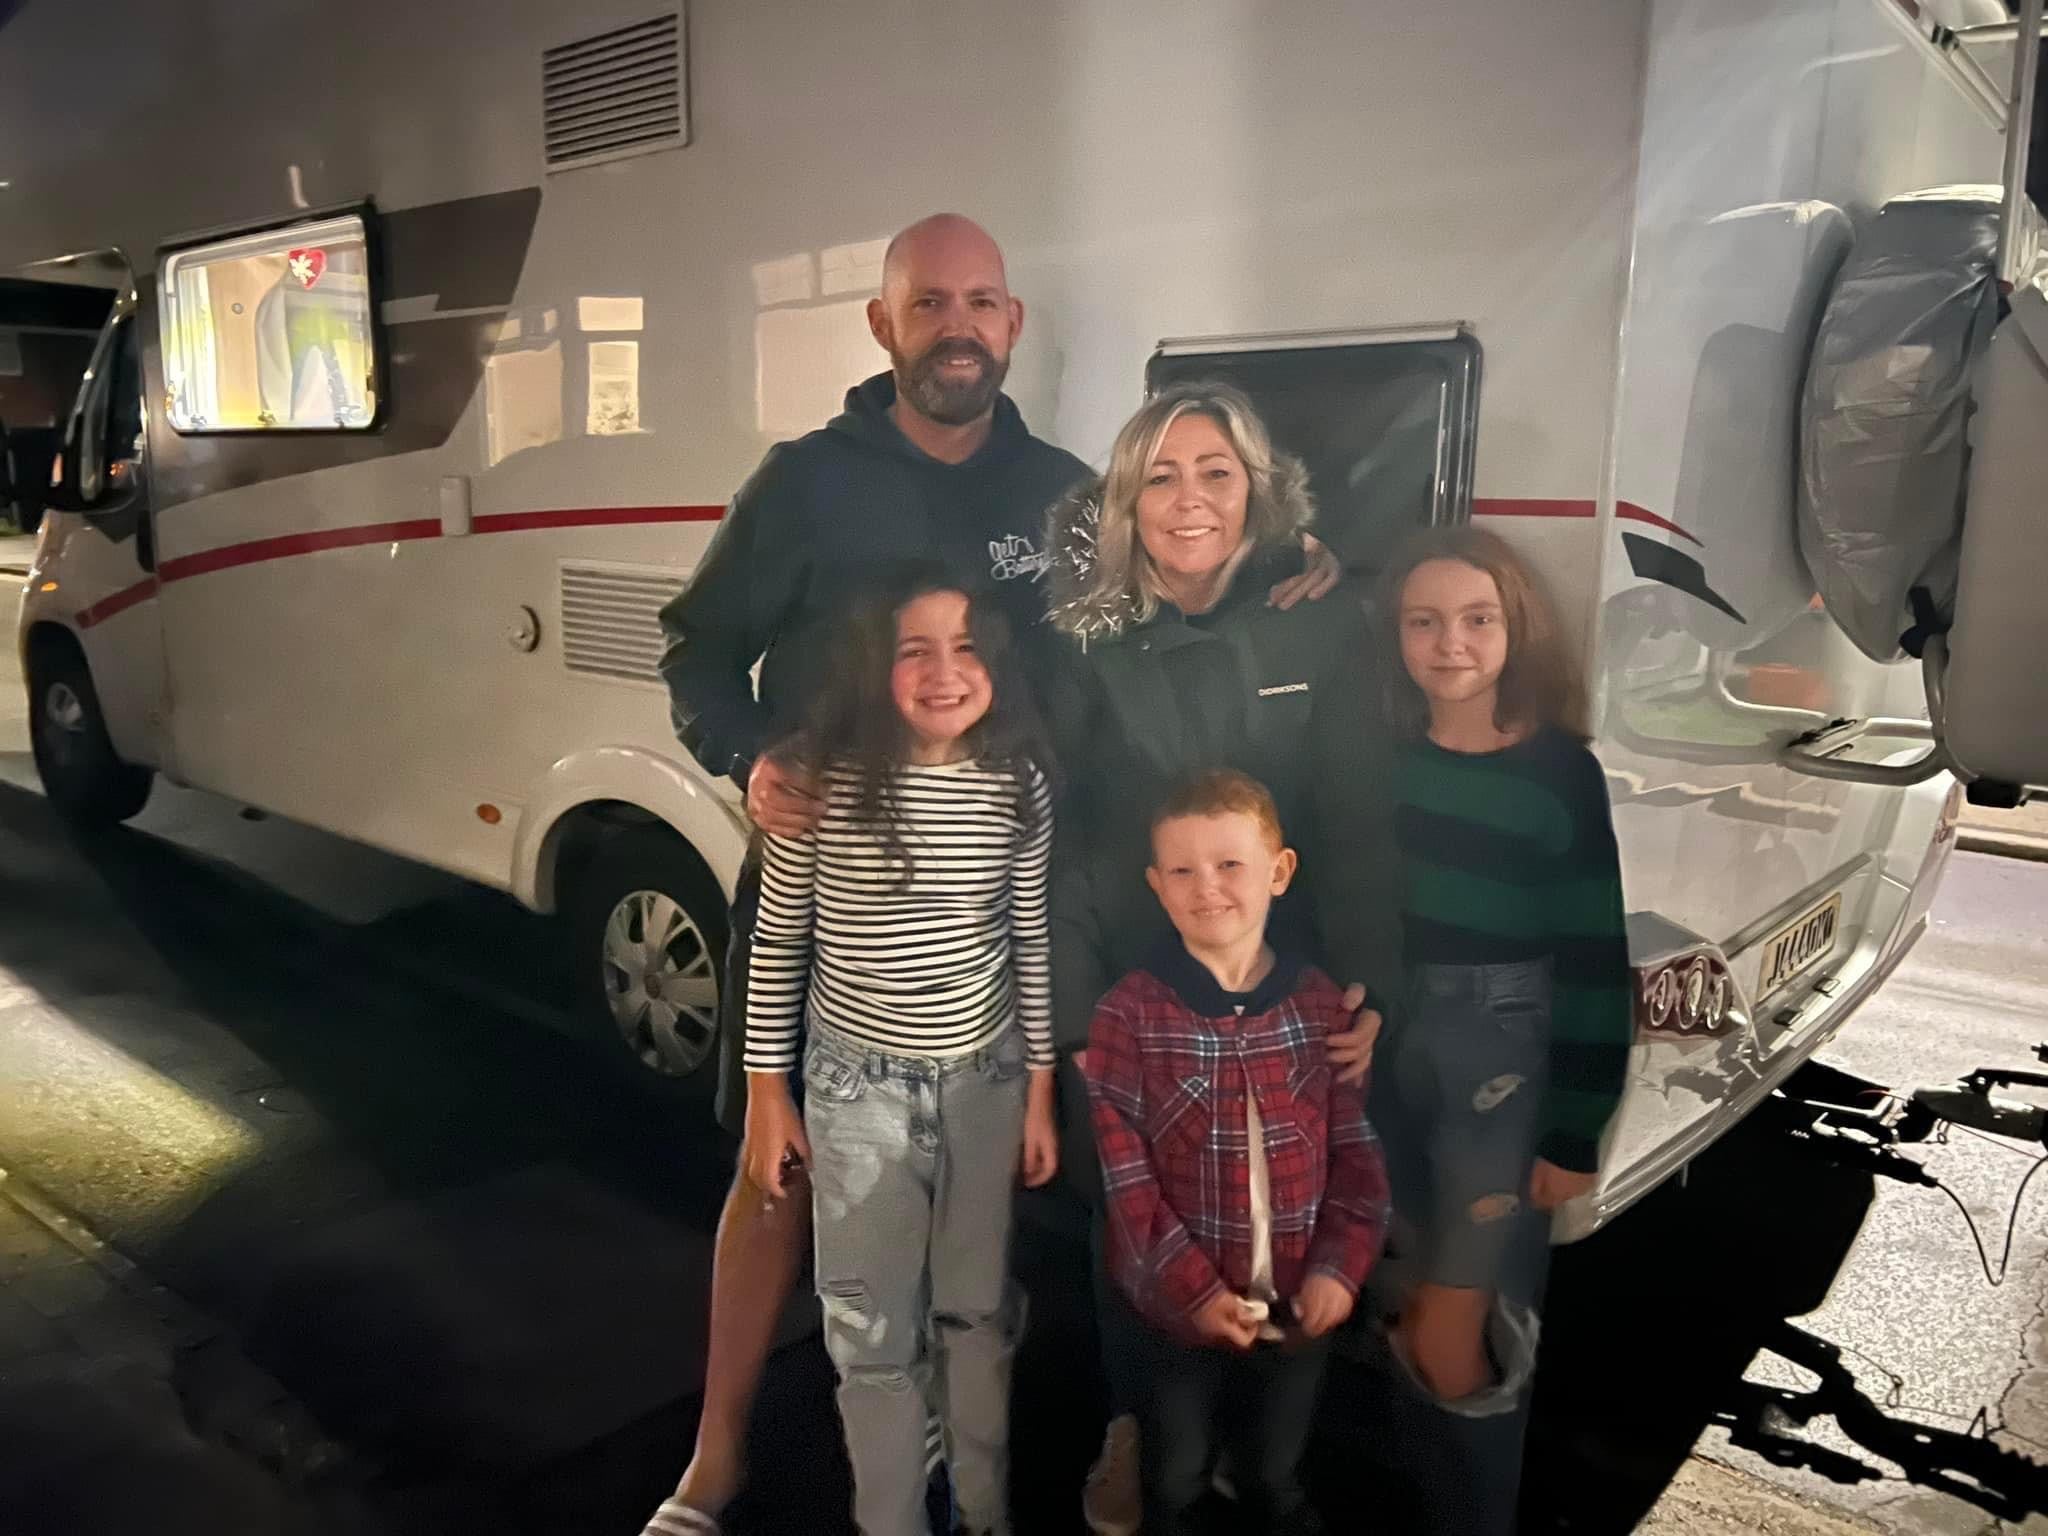 The family with their campervan, November 2022.